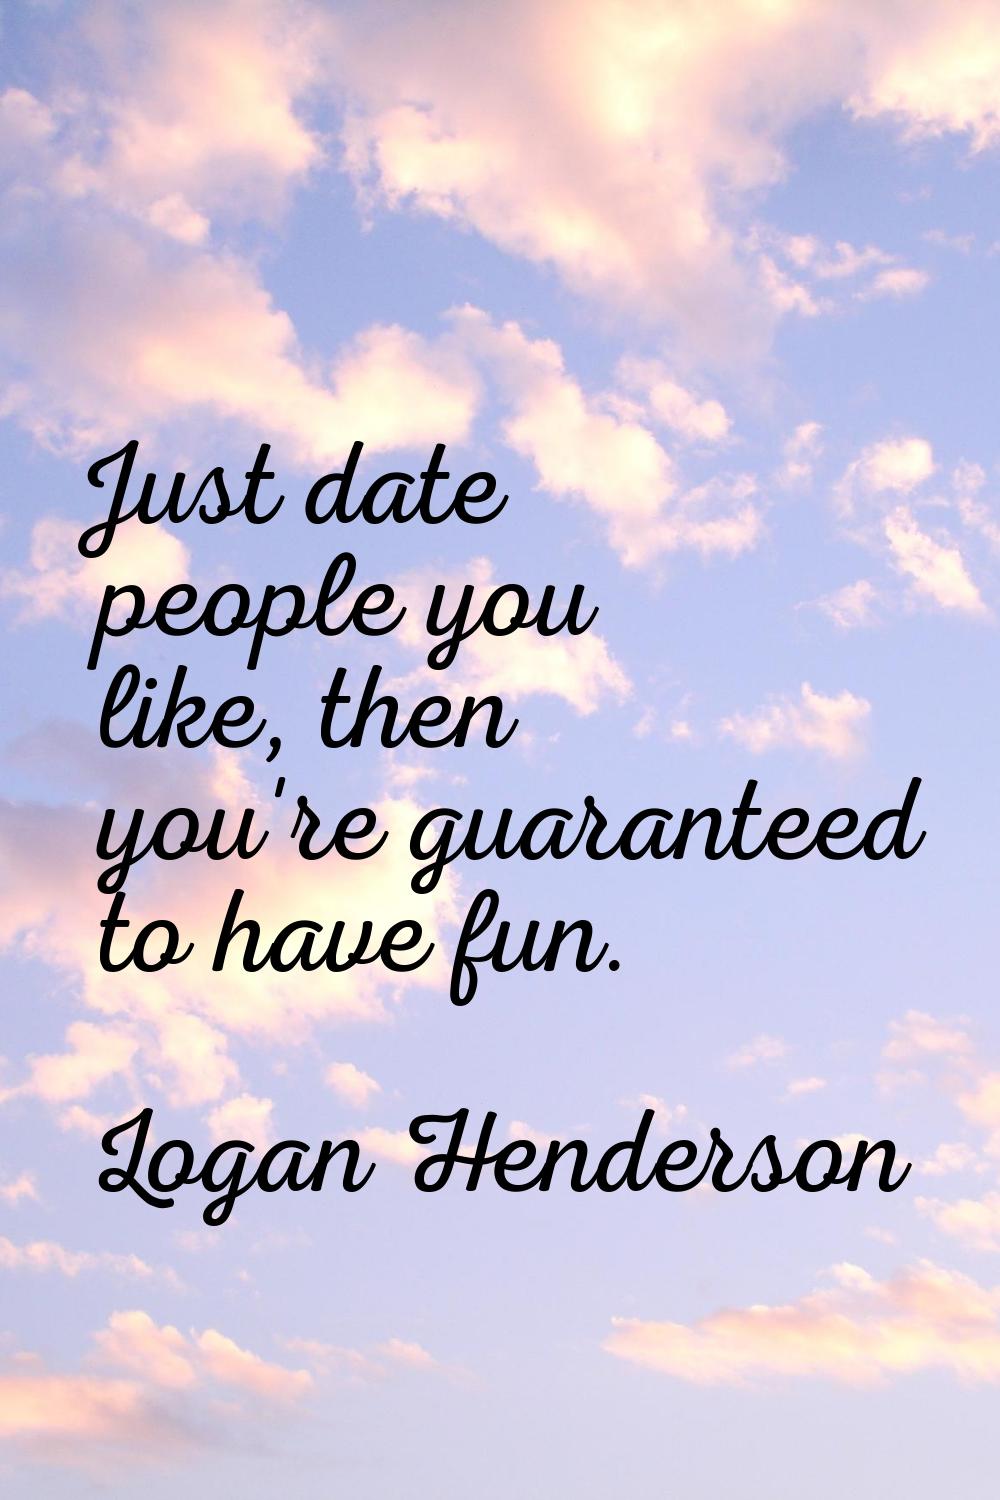 Just date people you like, then you're guaranteed to have fun.